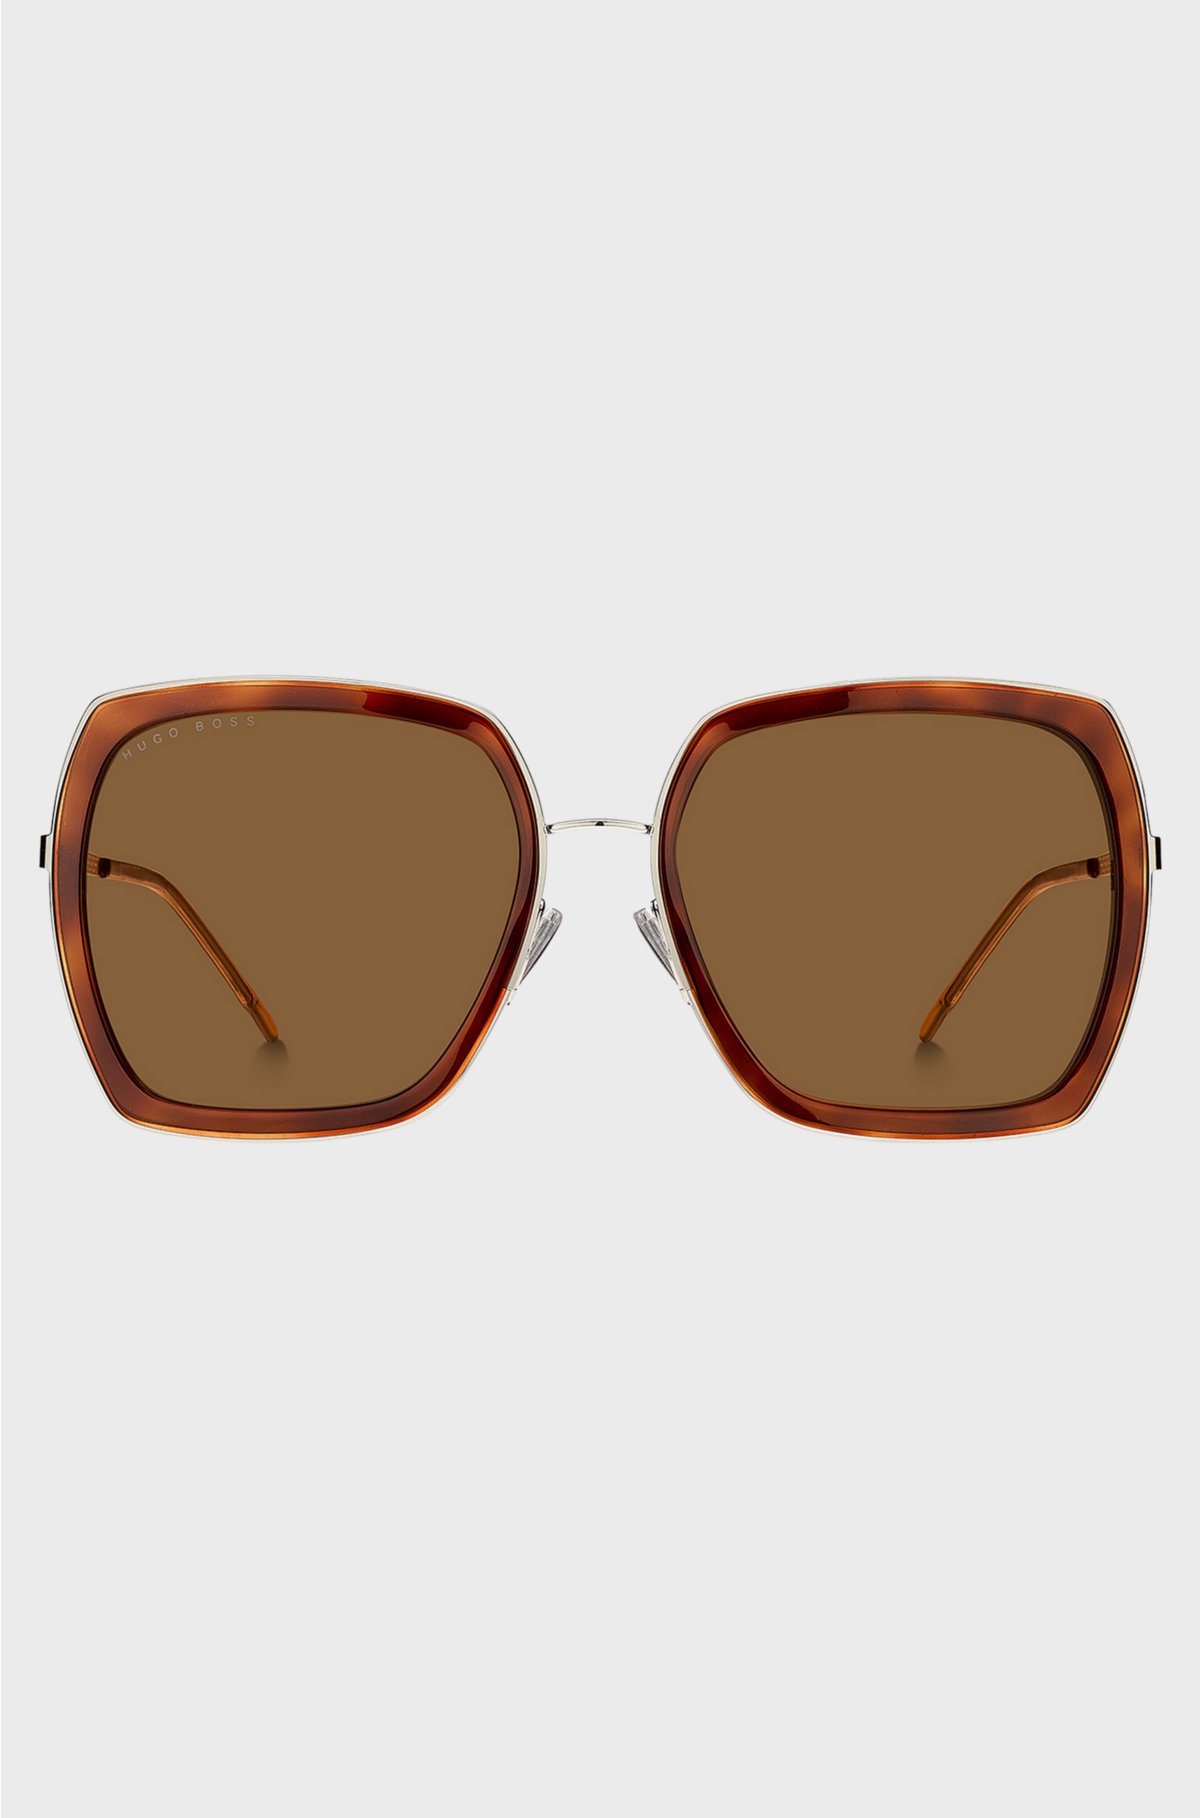 Angular sunglasses with Havana frames and signature hardware, Brown Patterned